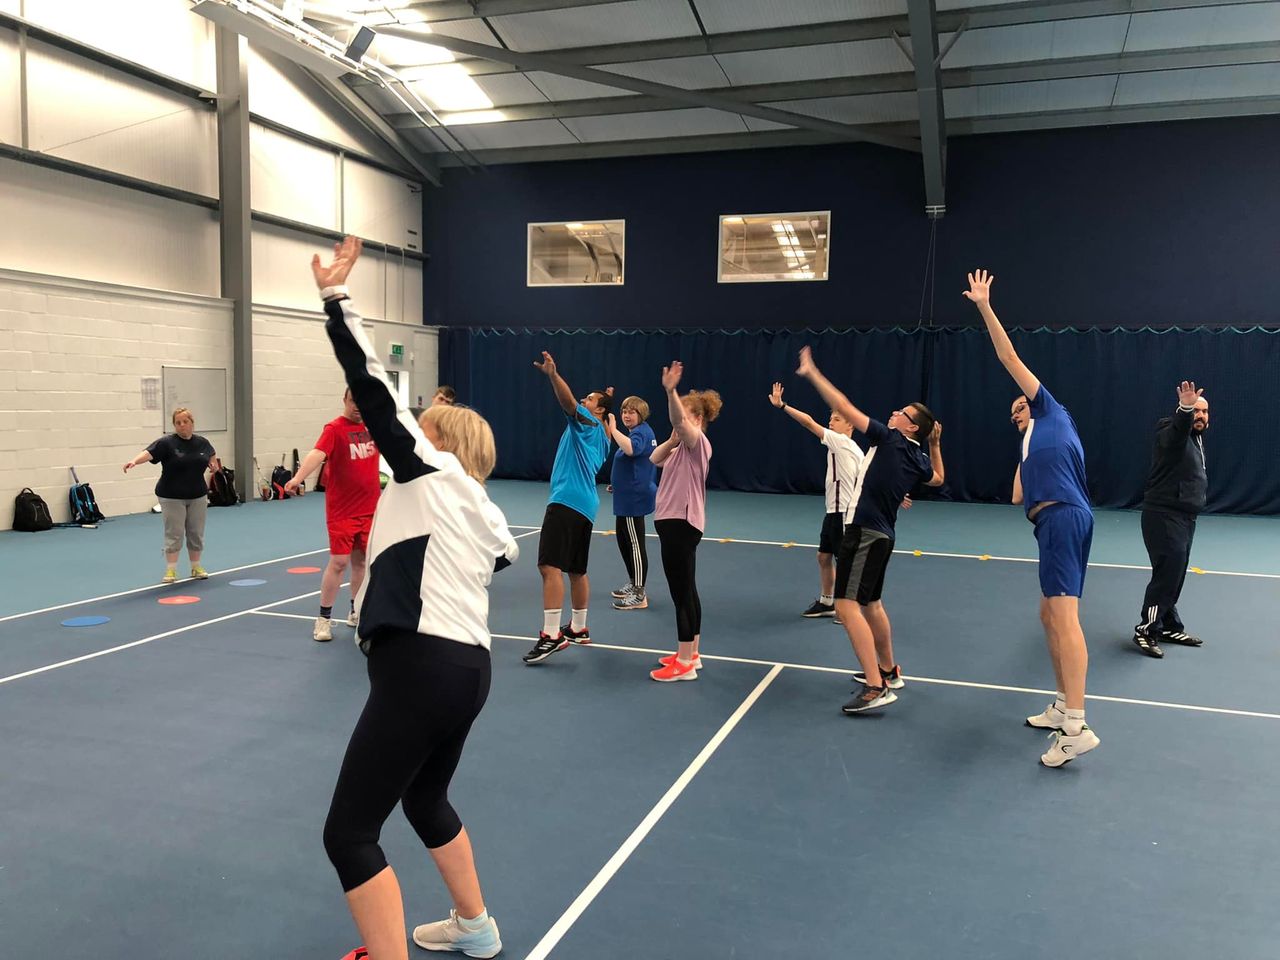 Sue and the players in the Nike Tick position (left arm pointing to the sky, and right arm bent touching the back of the head) - working on the overarm serve.